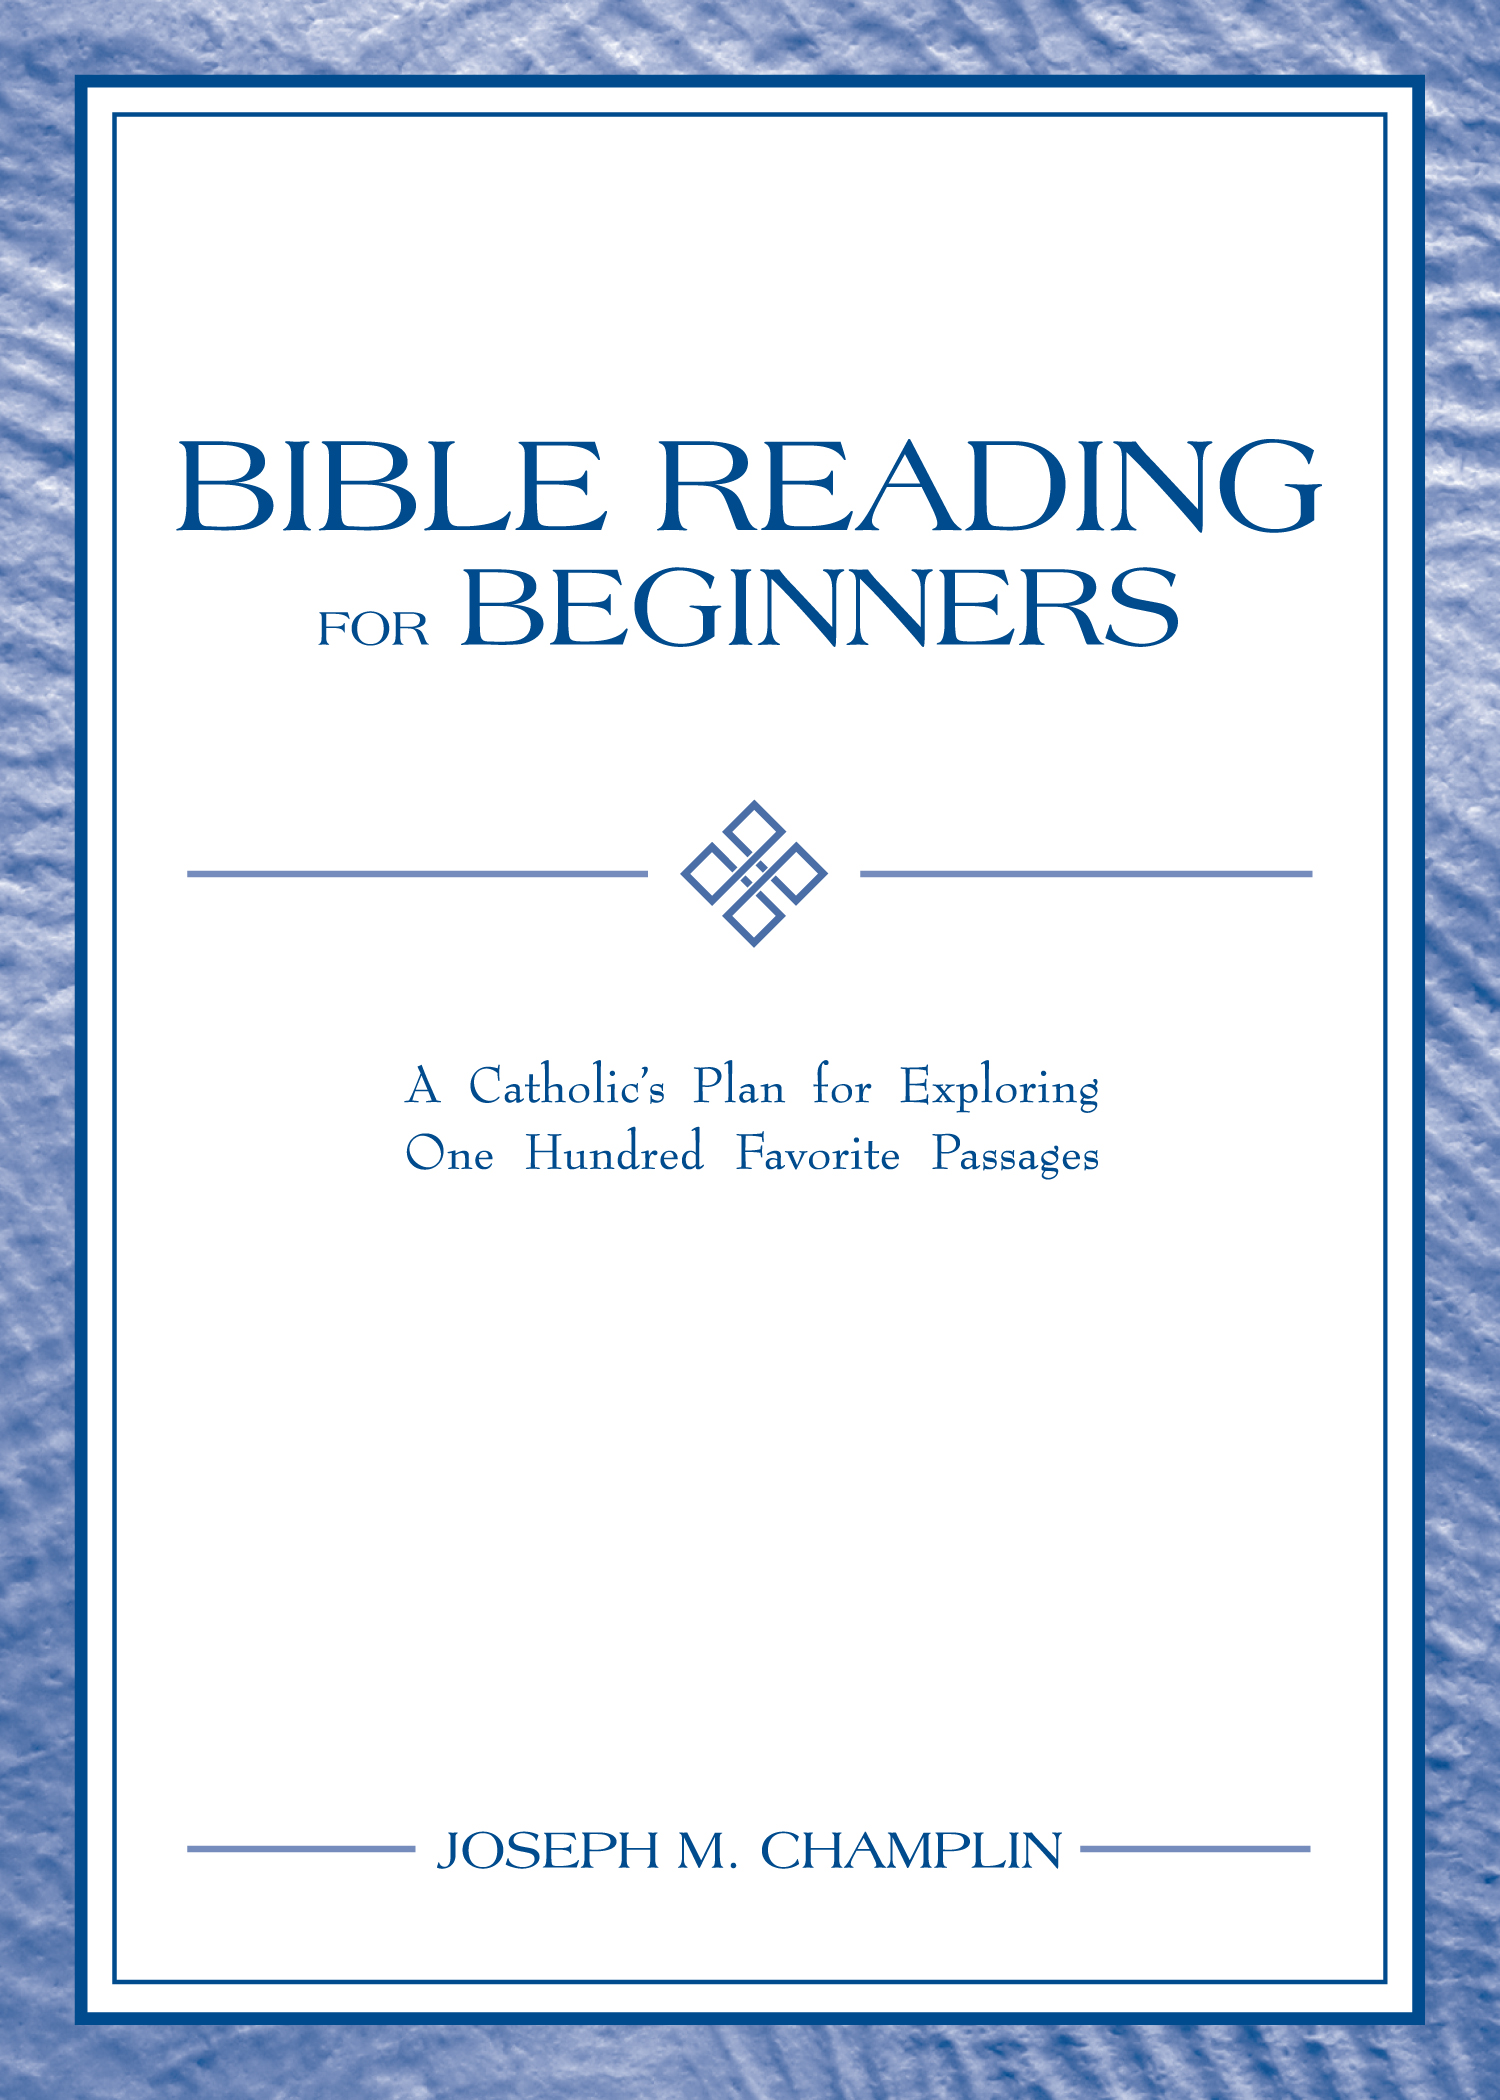 catholic bible study guide for beginners